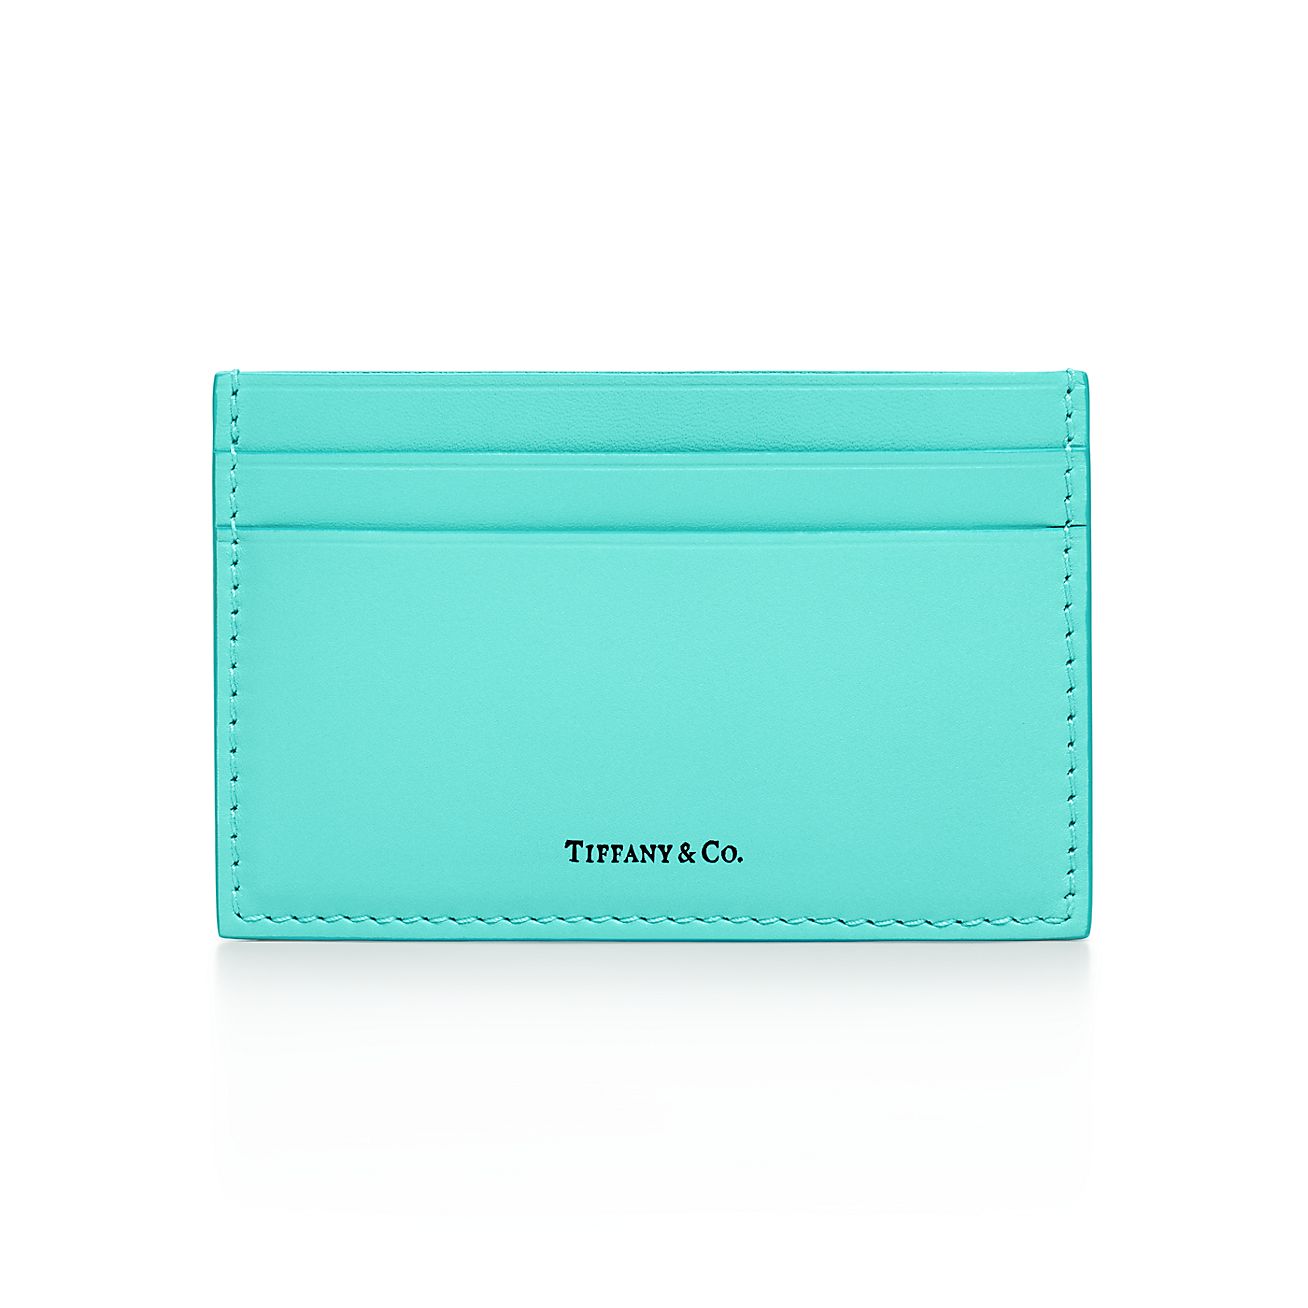 tiffany & co business card holder